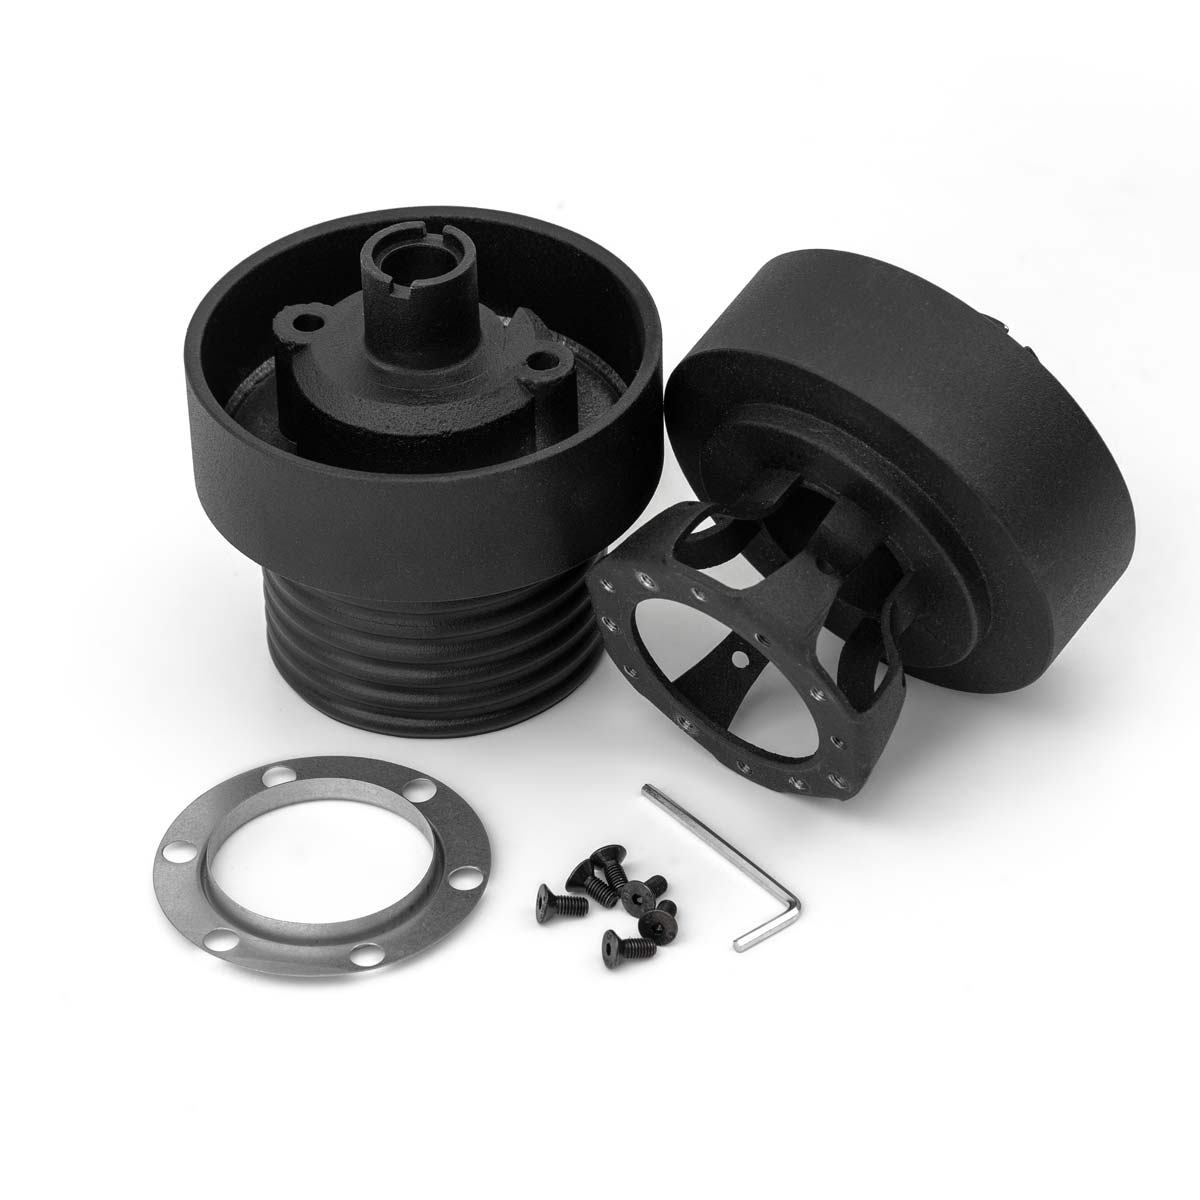 LUISI steering wheel hub Ford Courier 1989-1996 (TÜV-compliant deformable / 6x74mm 6x70mm)